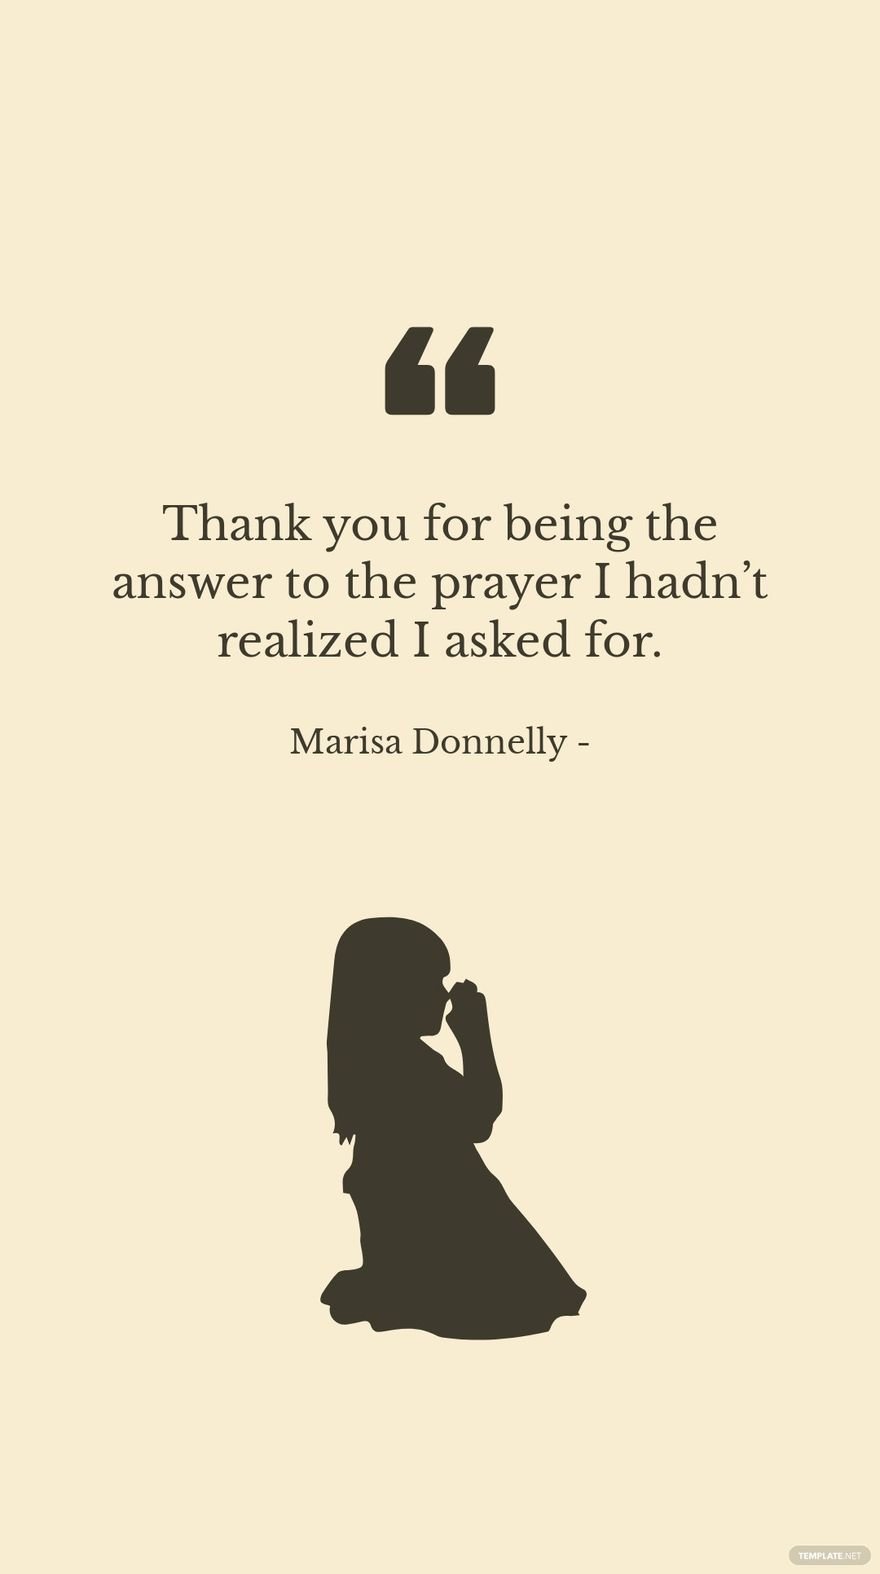 Marisa Donnelly - Thank you for being the answer to the prayer I hadn’t realized I asked for. in JPG